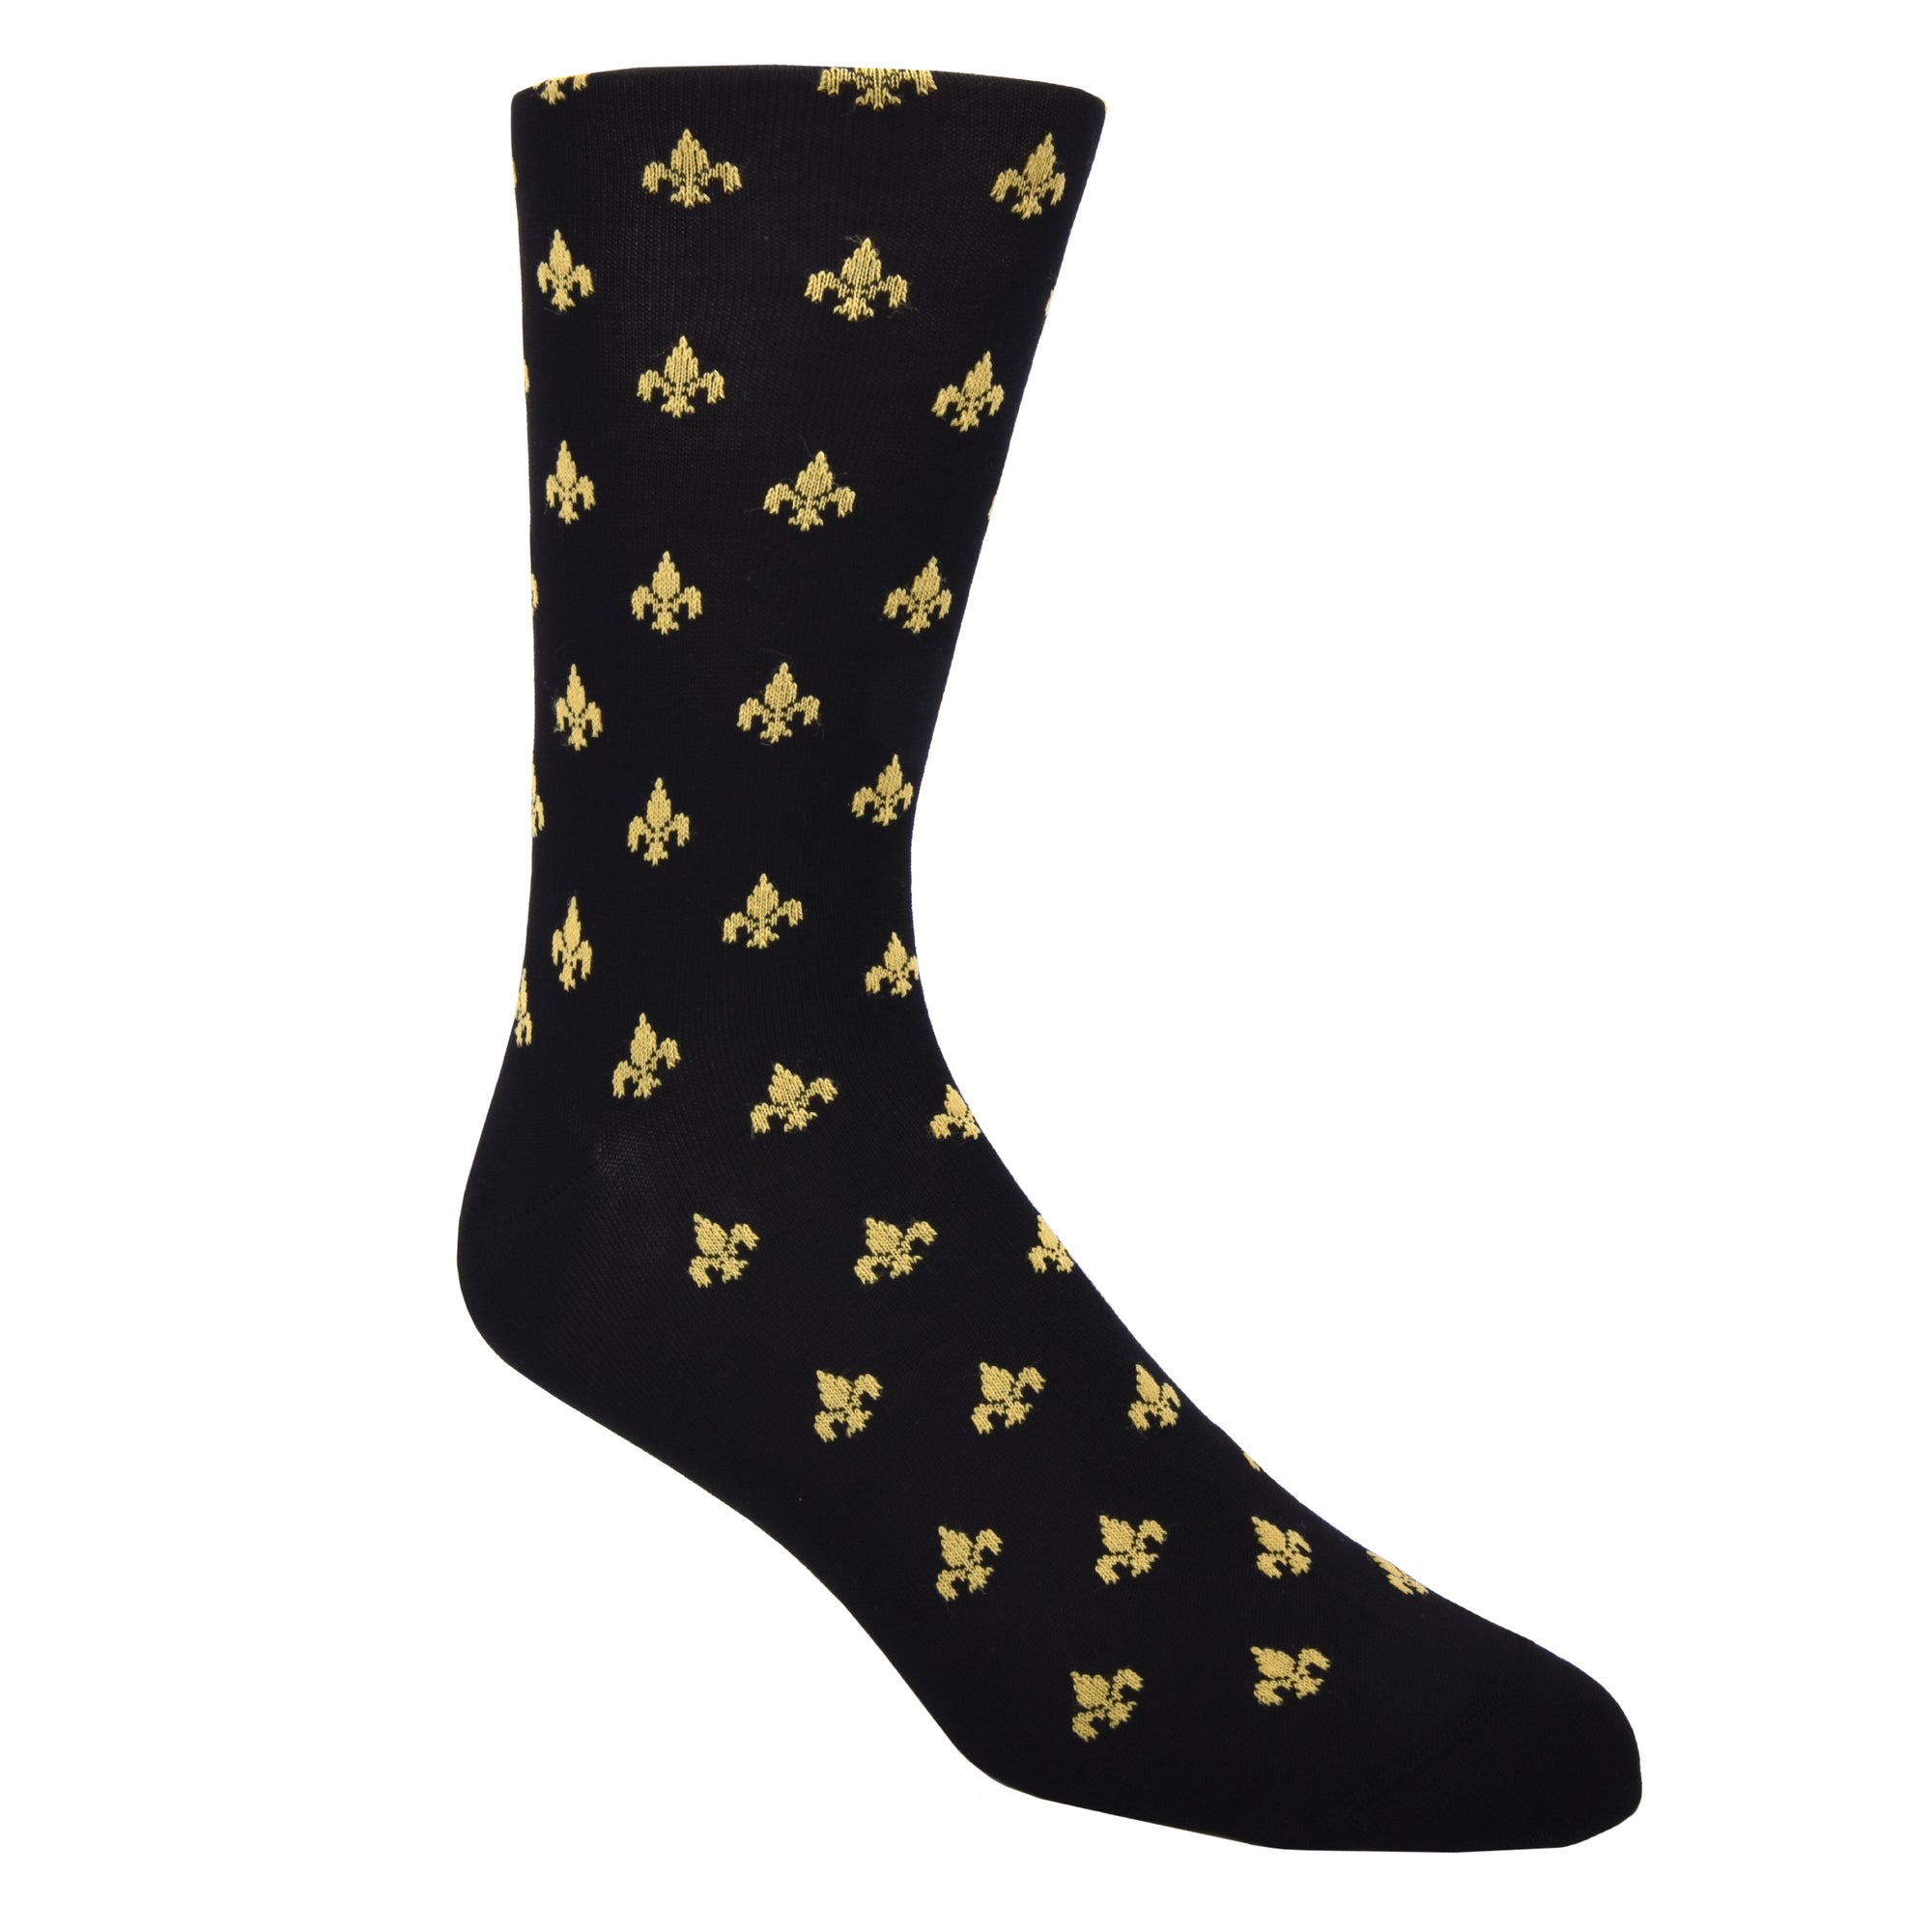 Royalty & revelry, saints and sinners...whatever you're up to, life is too short to wear boring socks! #damnright  70% Mercerized Cotton 29% Nylon 1% Spandex Fits Size 8-12 Machine Washable Made in the USA